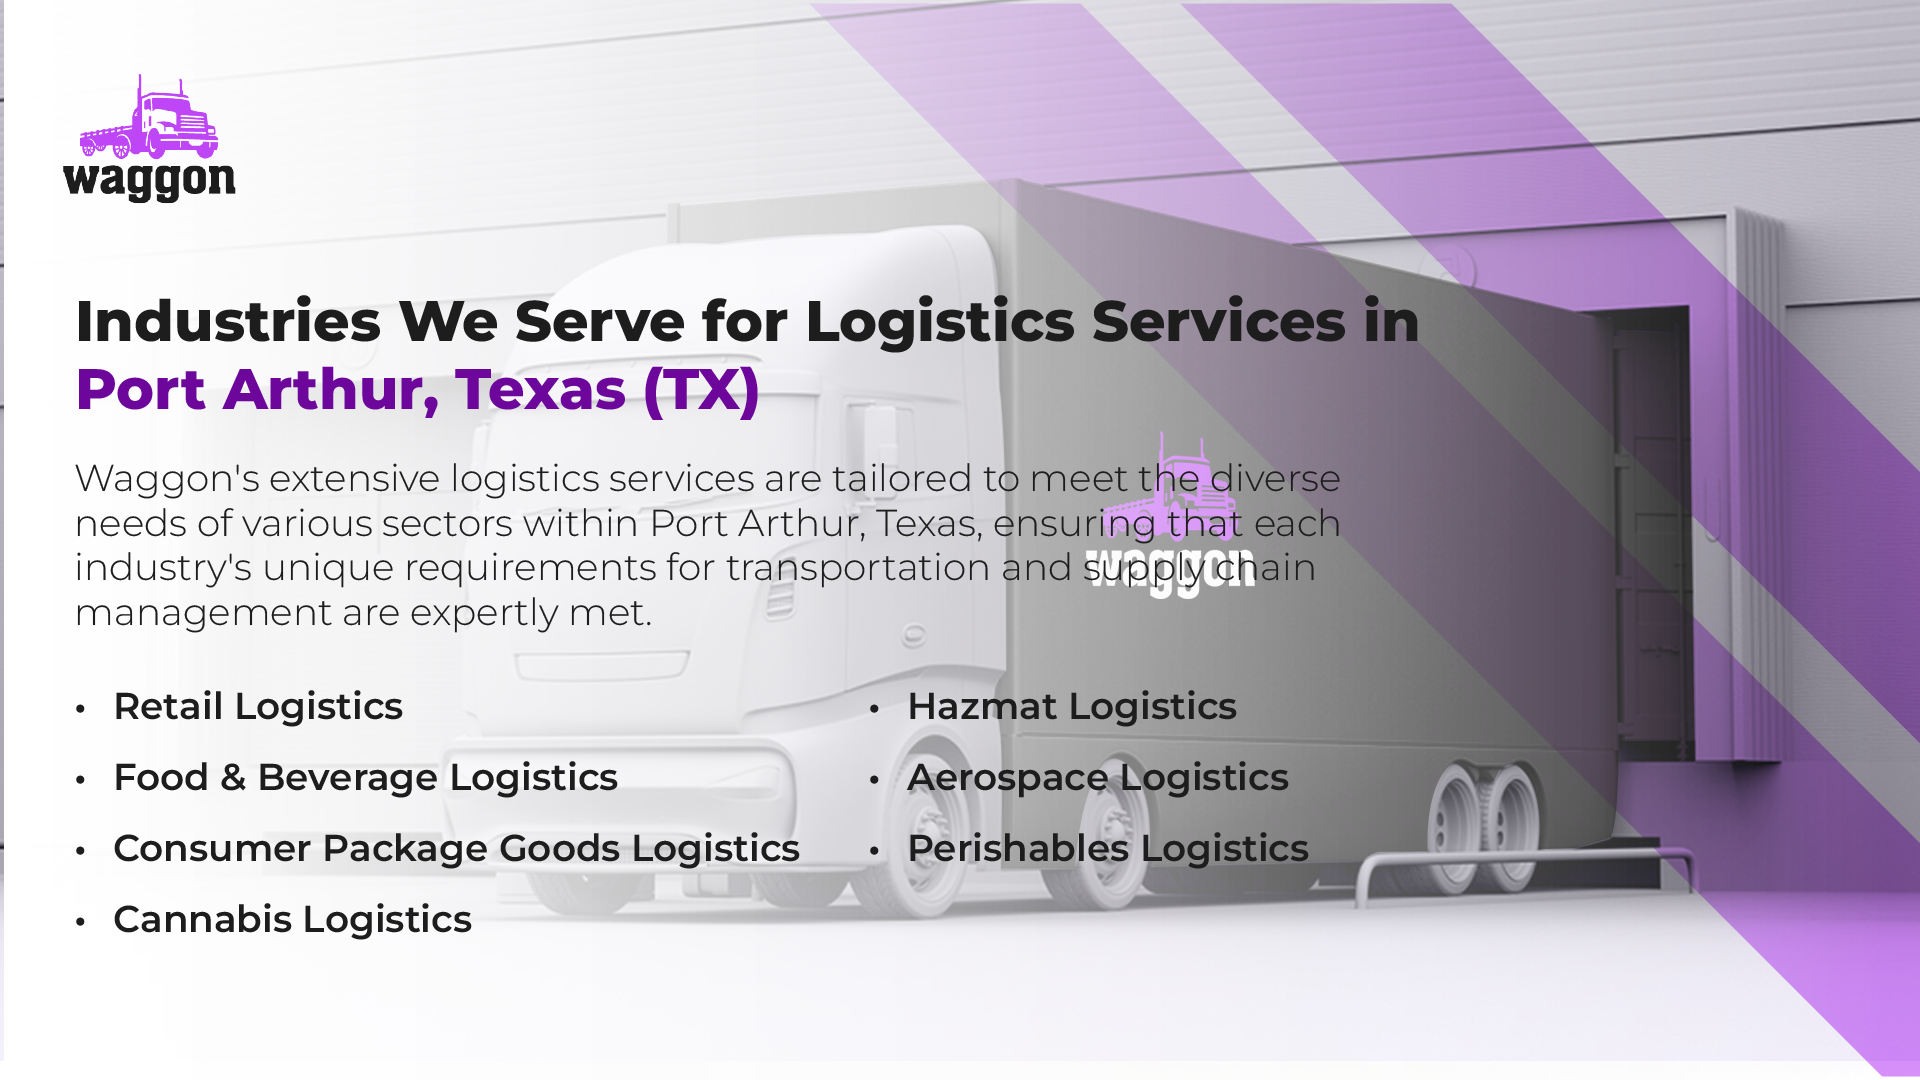 Industries We Serve for Logistics Services in Port Arthur, Texas (TX)